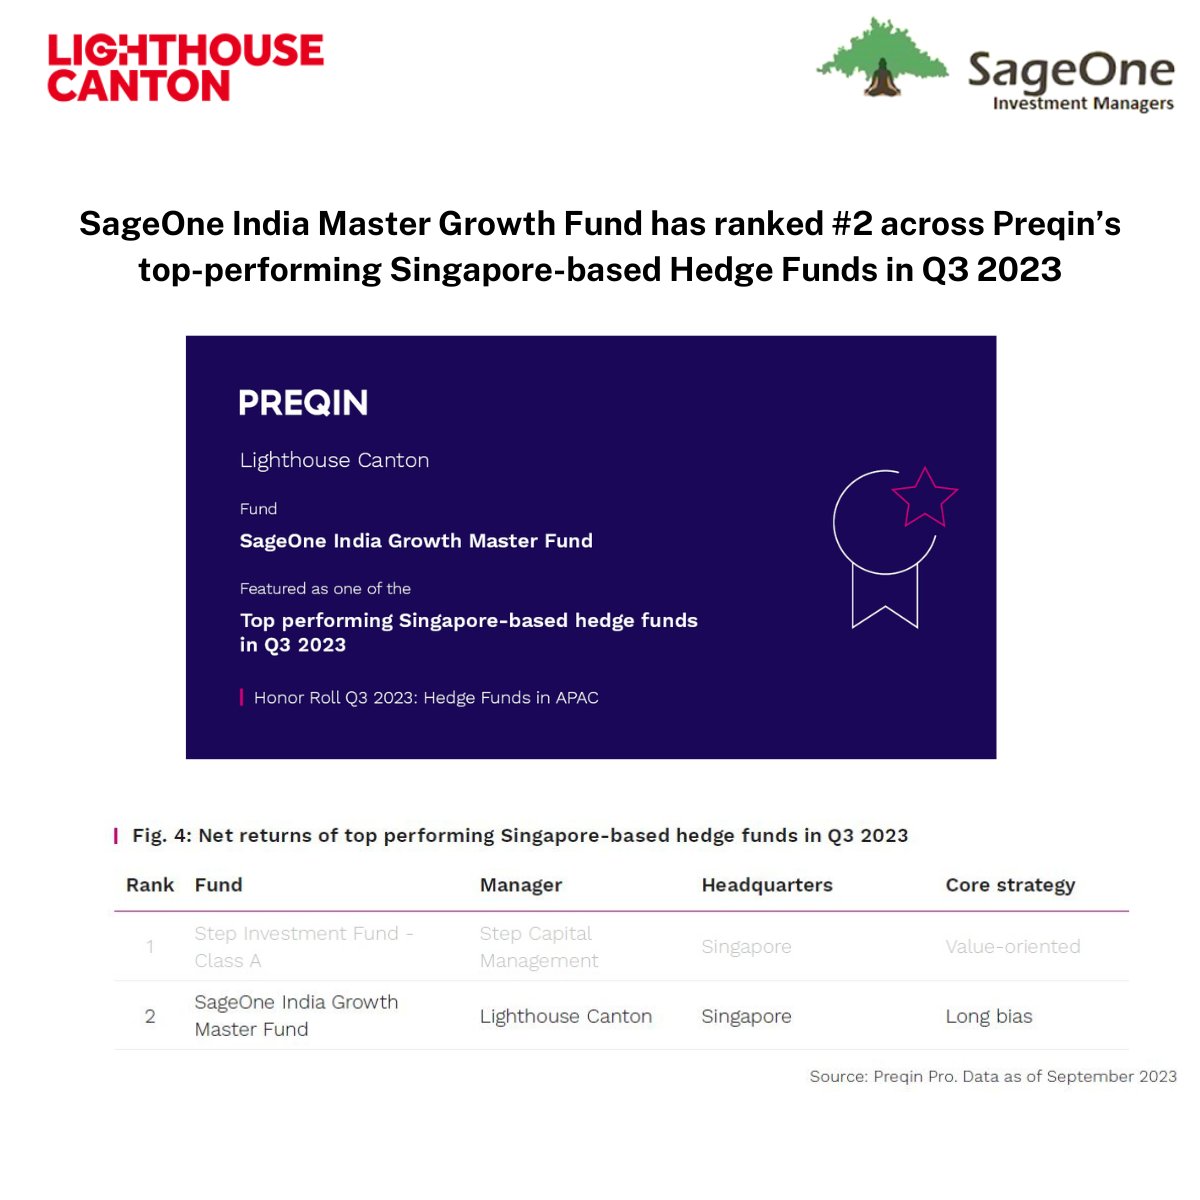 We are pleased that our SageOne India Master Growth Fund has ranked #2 across @Preqin  top-performing Singapore-based Hedge Funds in Q3 2023.

Read the report here- preqin.com/insights/resea…

#LighthouseCanton
#SageOne
#HedgeFund 
#HedgeFunds